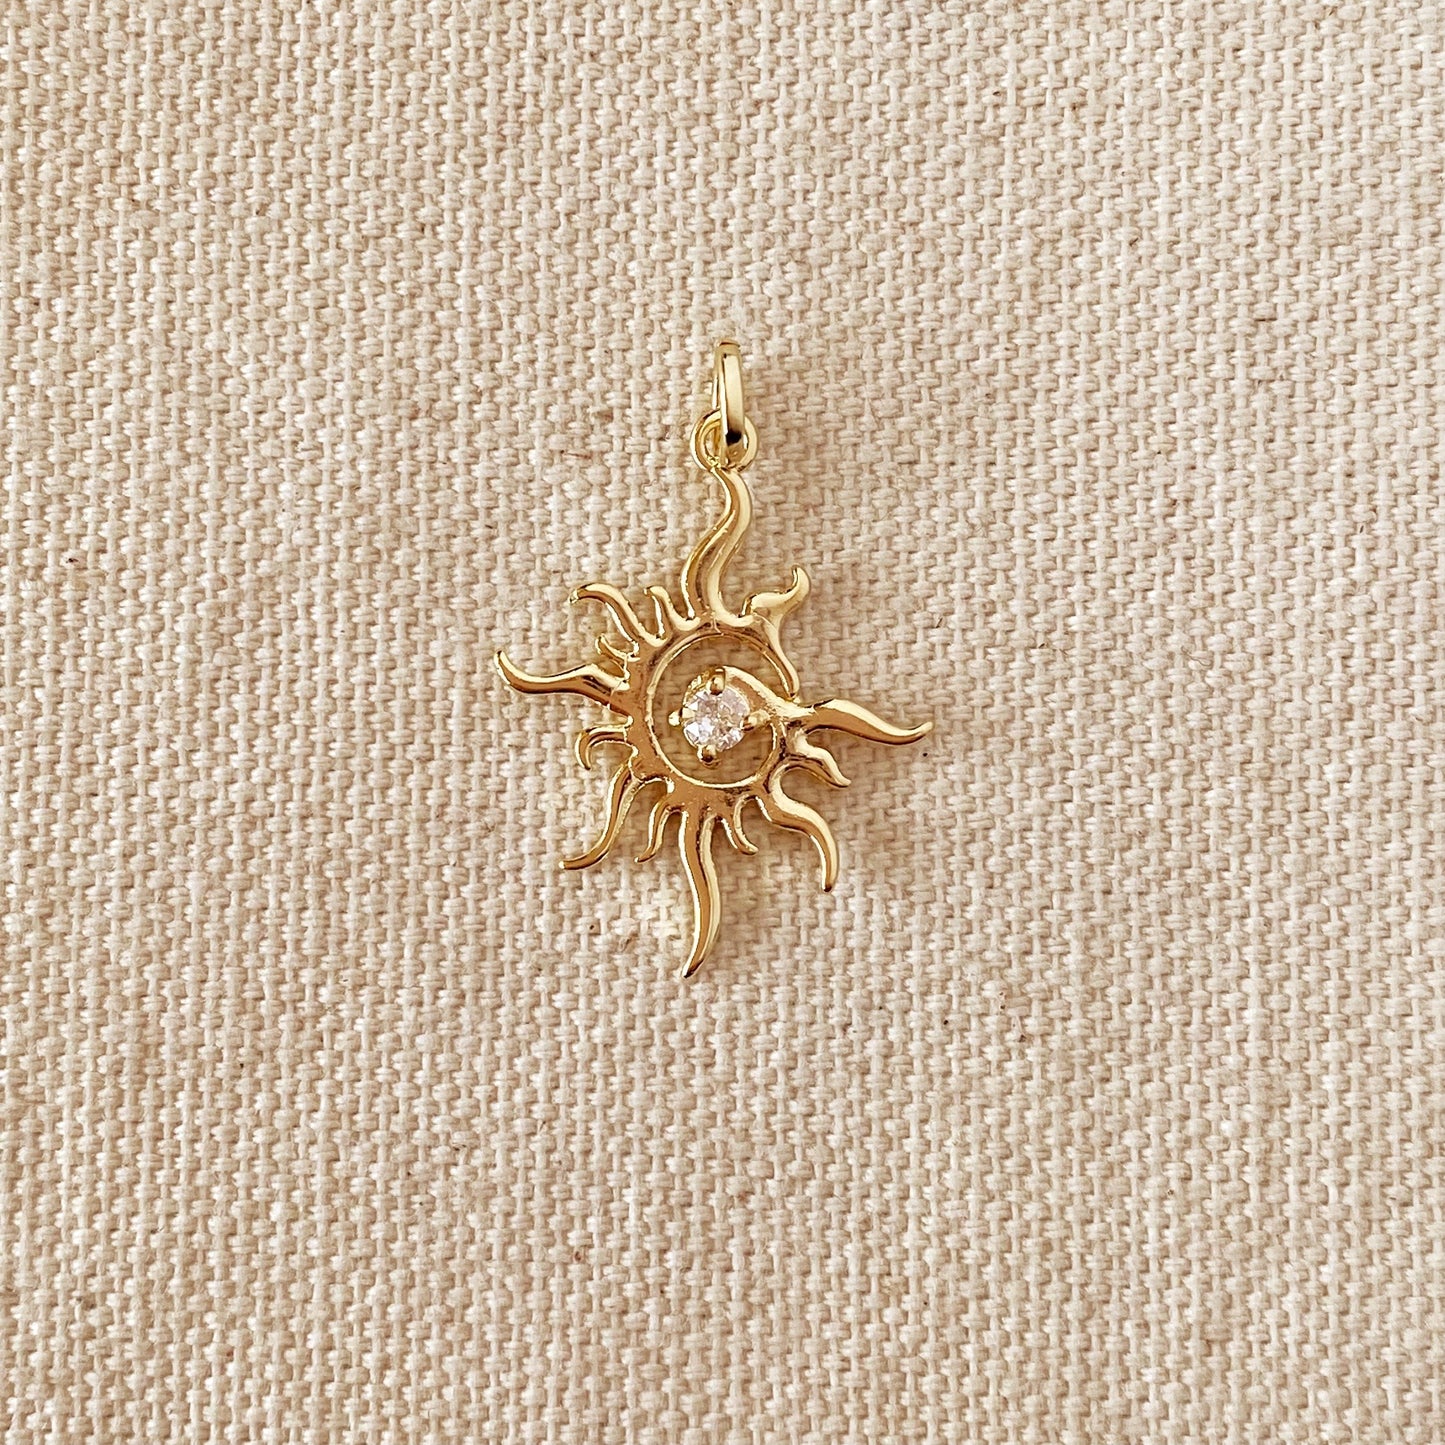 18k Gold Filled Radiant Sun Pendant With Cubic Zirconia Stones